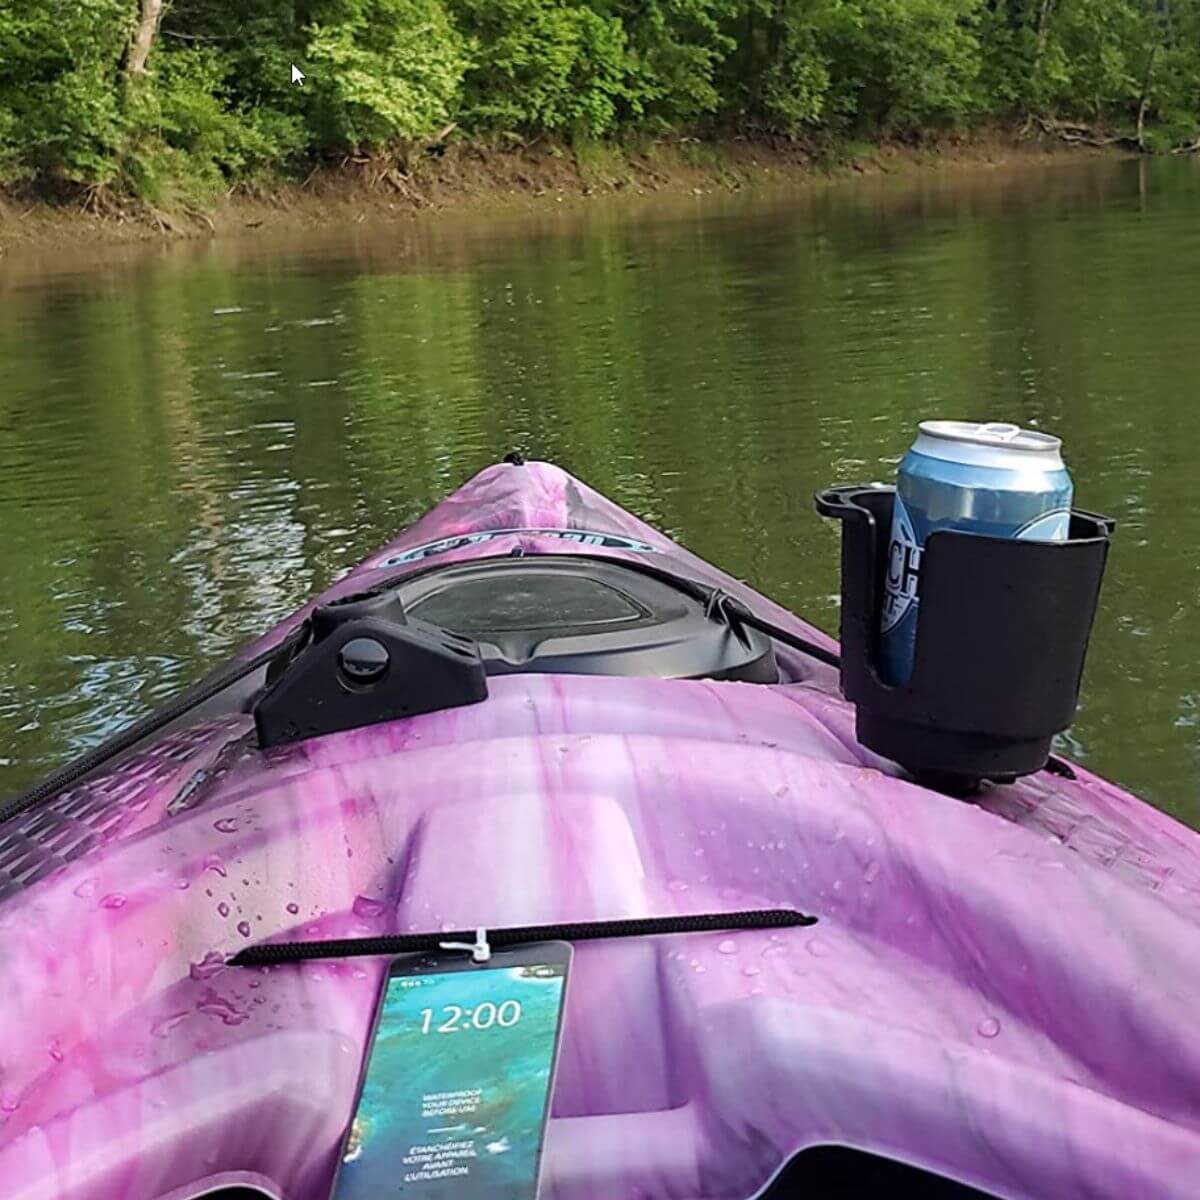 Tired of Knocking Your Drink Over? Check Out Our Picks for the Top Kayak Cup Holders!